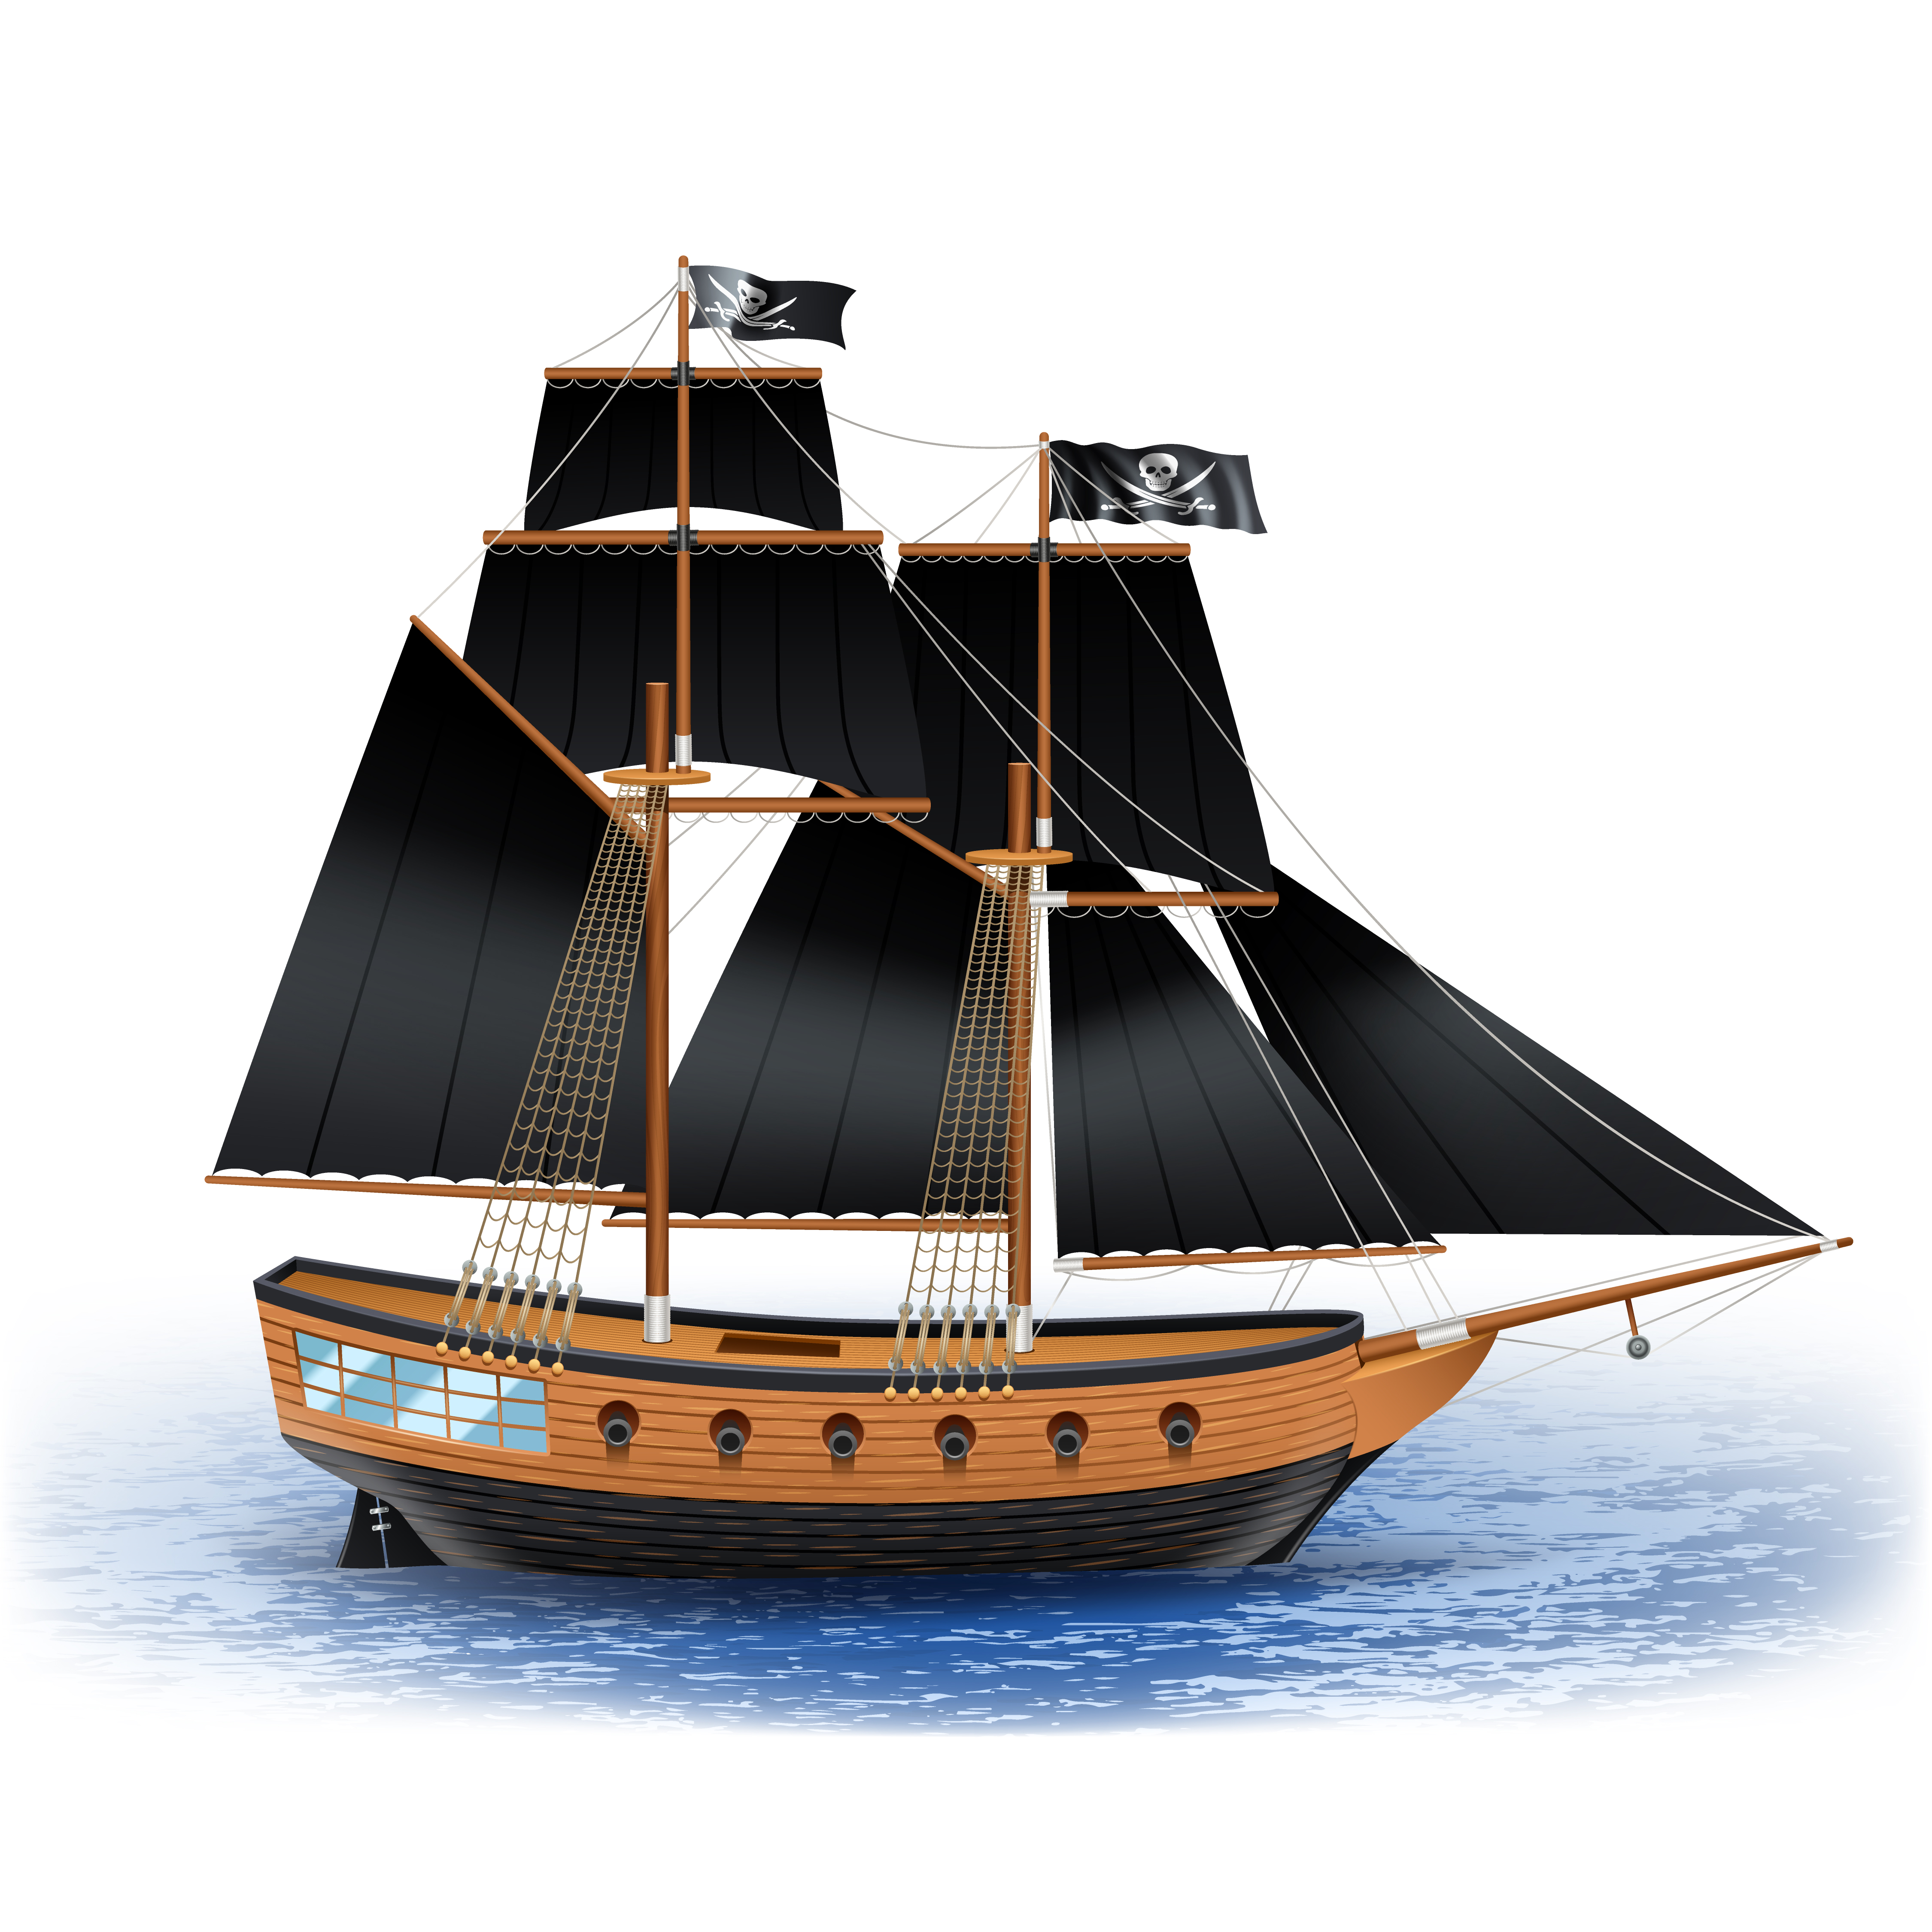 Pirate Ship Vector Image